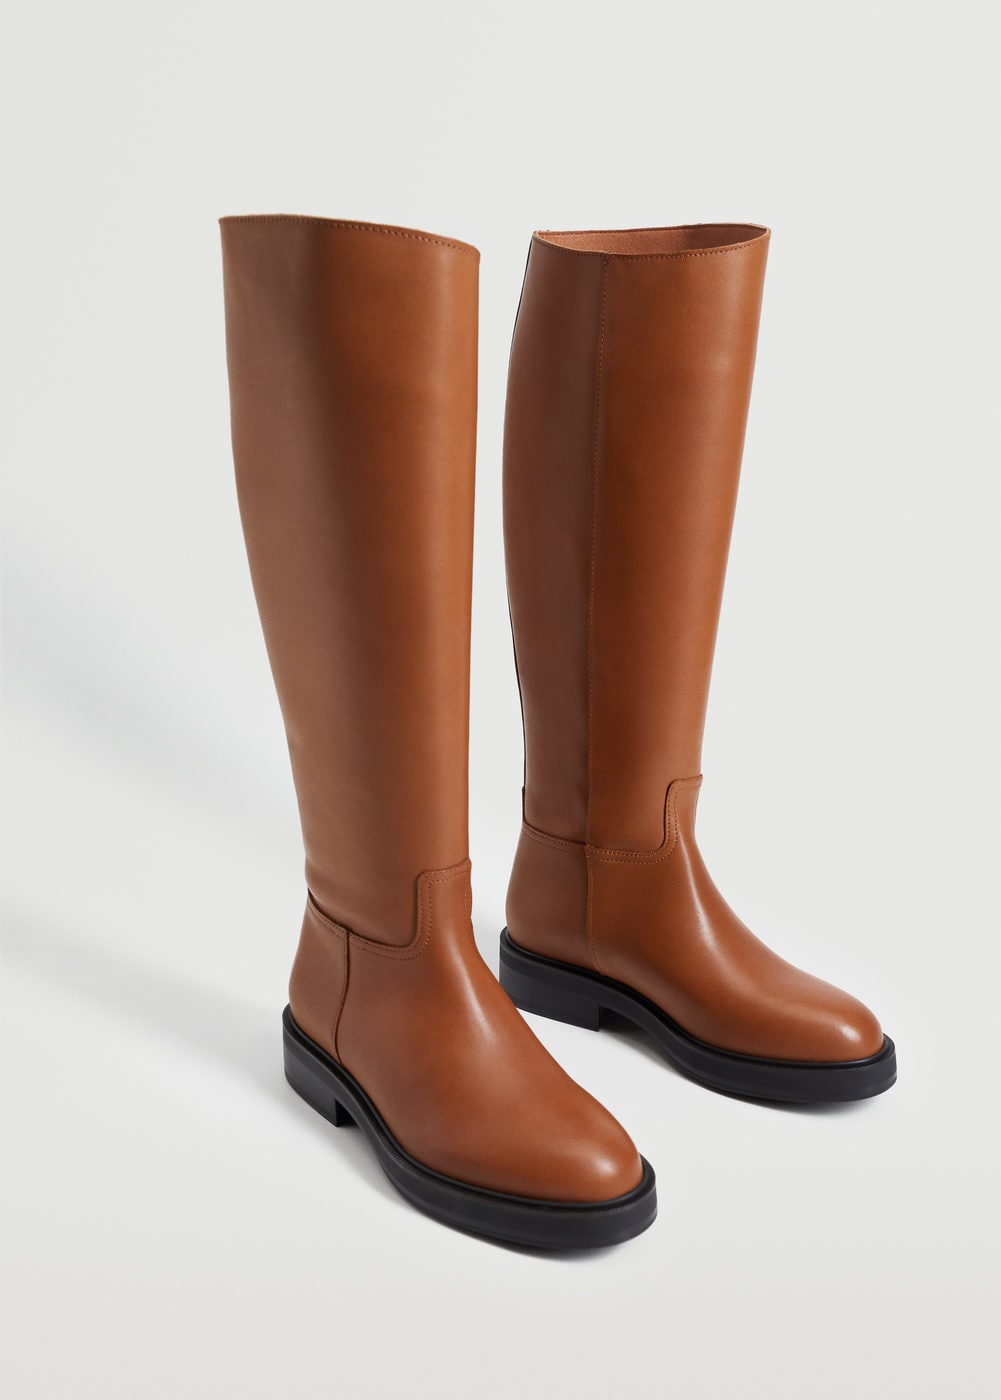 39 New Knee-High Boots to Wear With Skinny Jeans